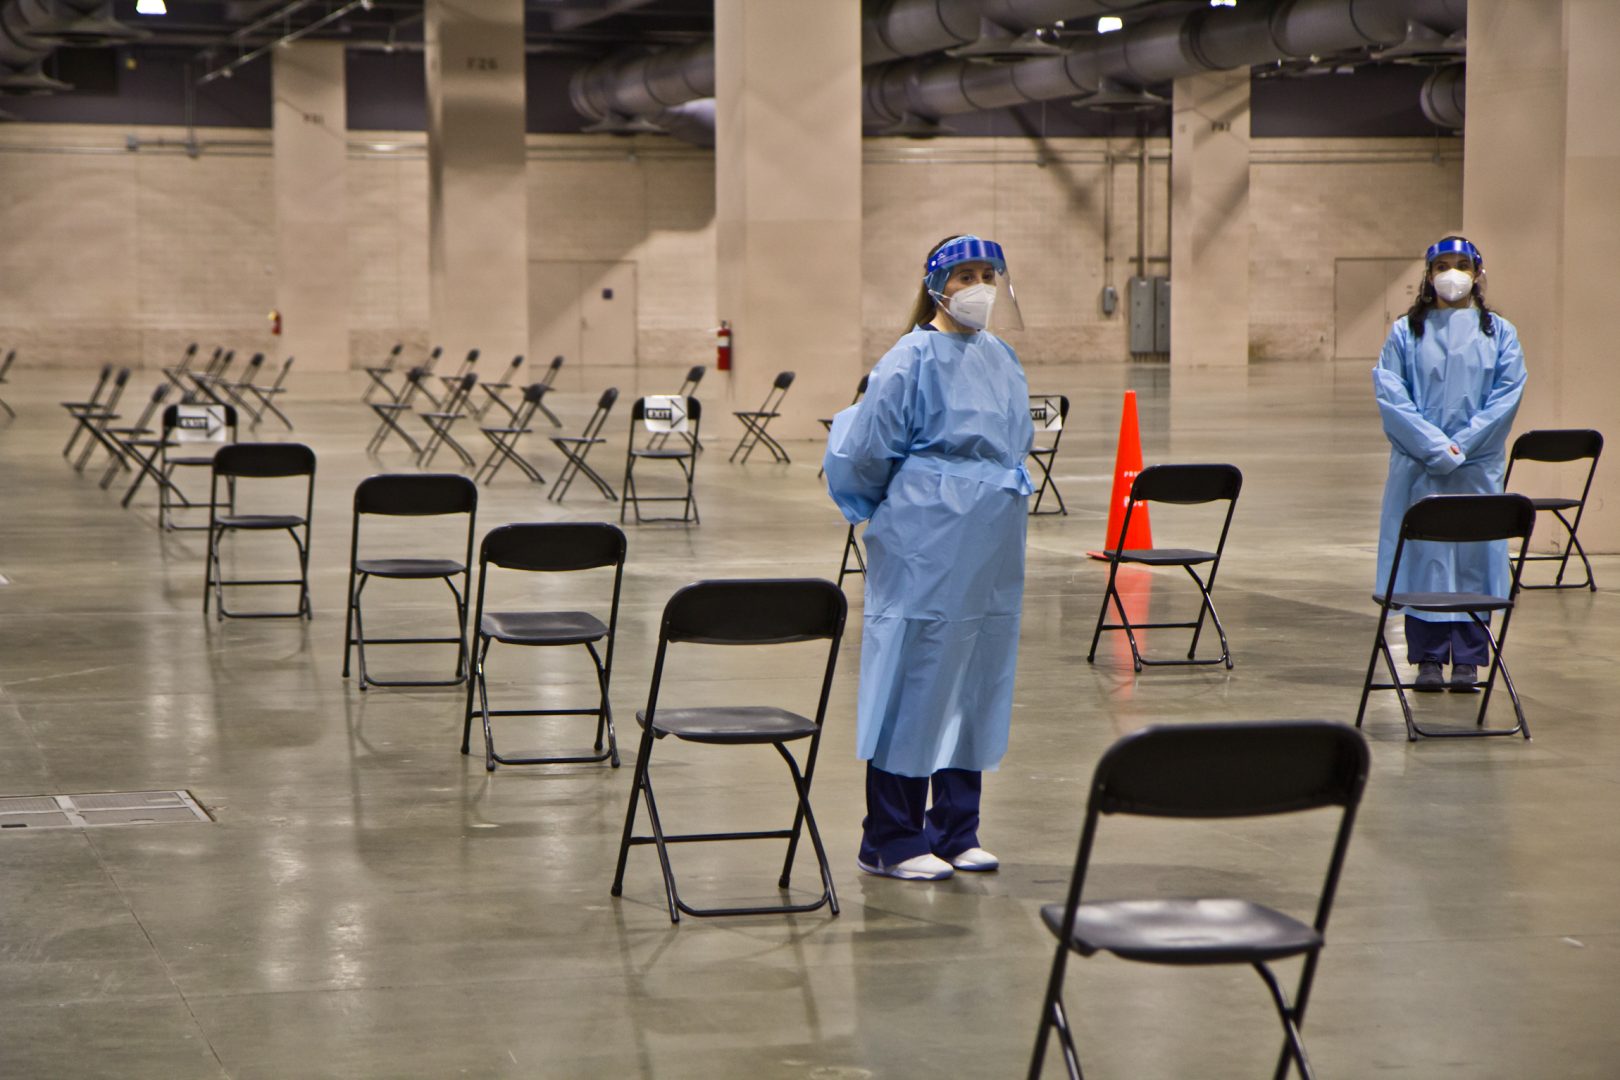 After receiving the vaccination, patients wait under observation at the community vaccine clinic at the Pennsylvania Convention Center. 